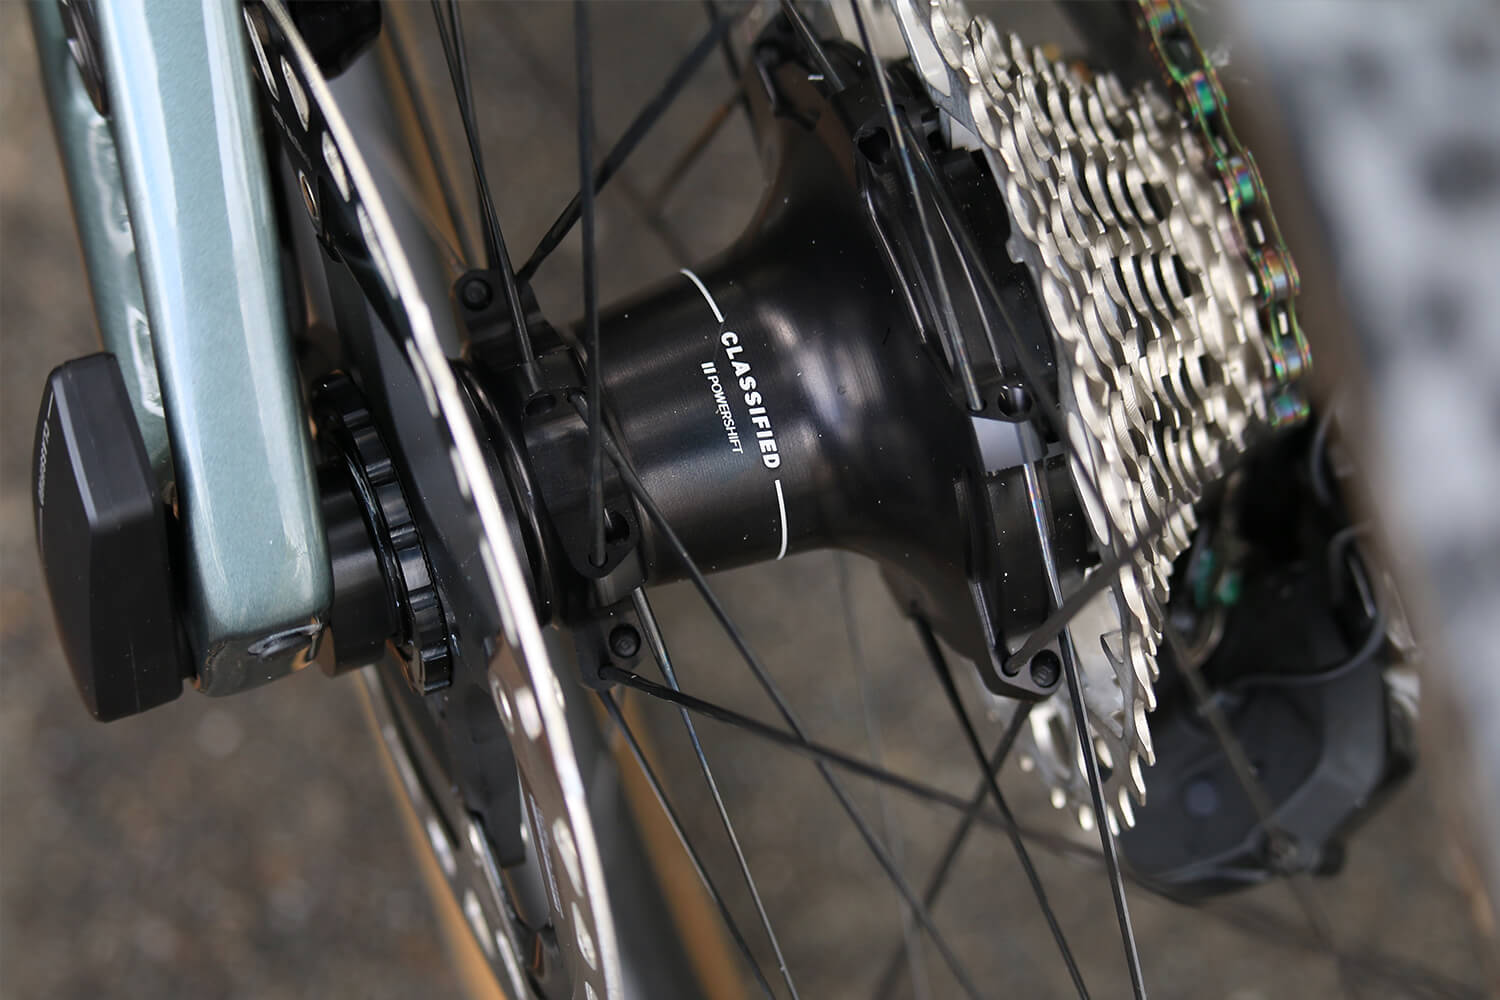 Classified Powershift Hub Contender Bicycles detail